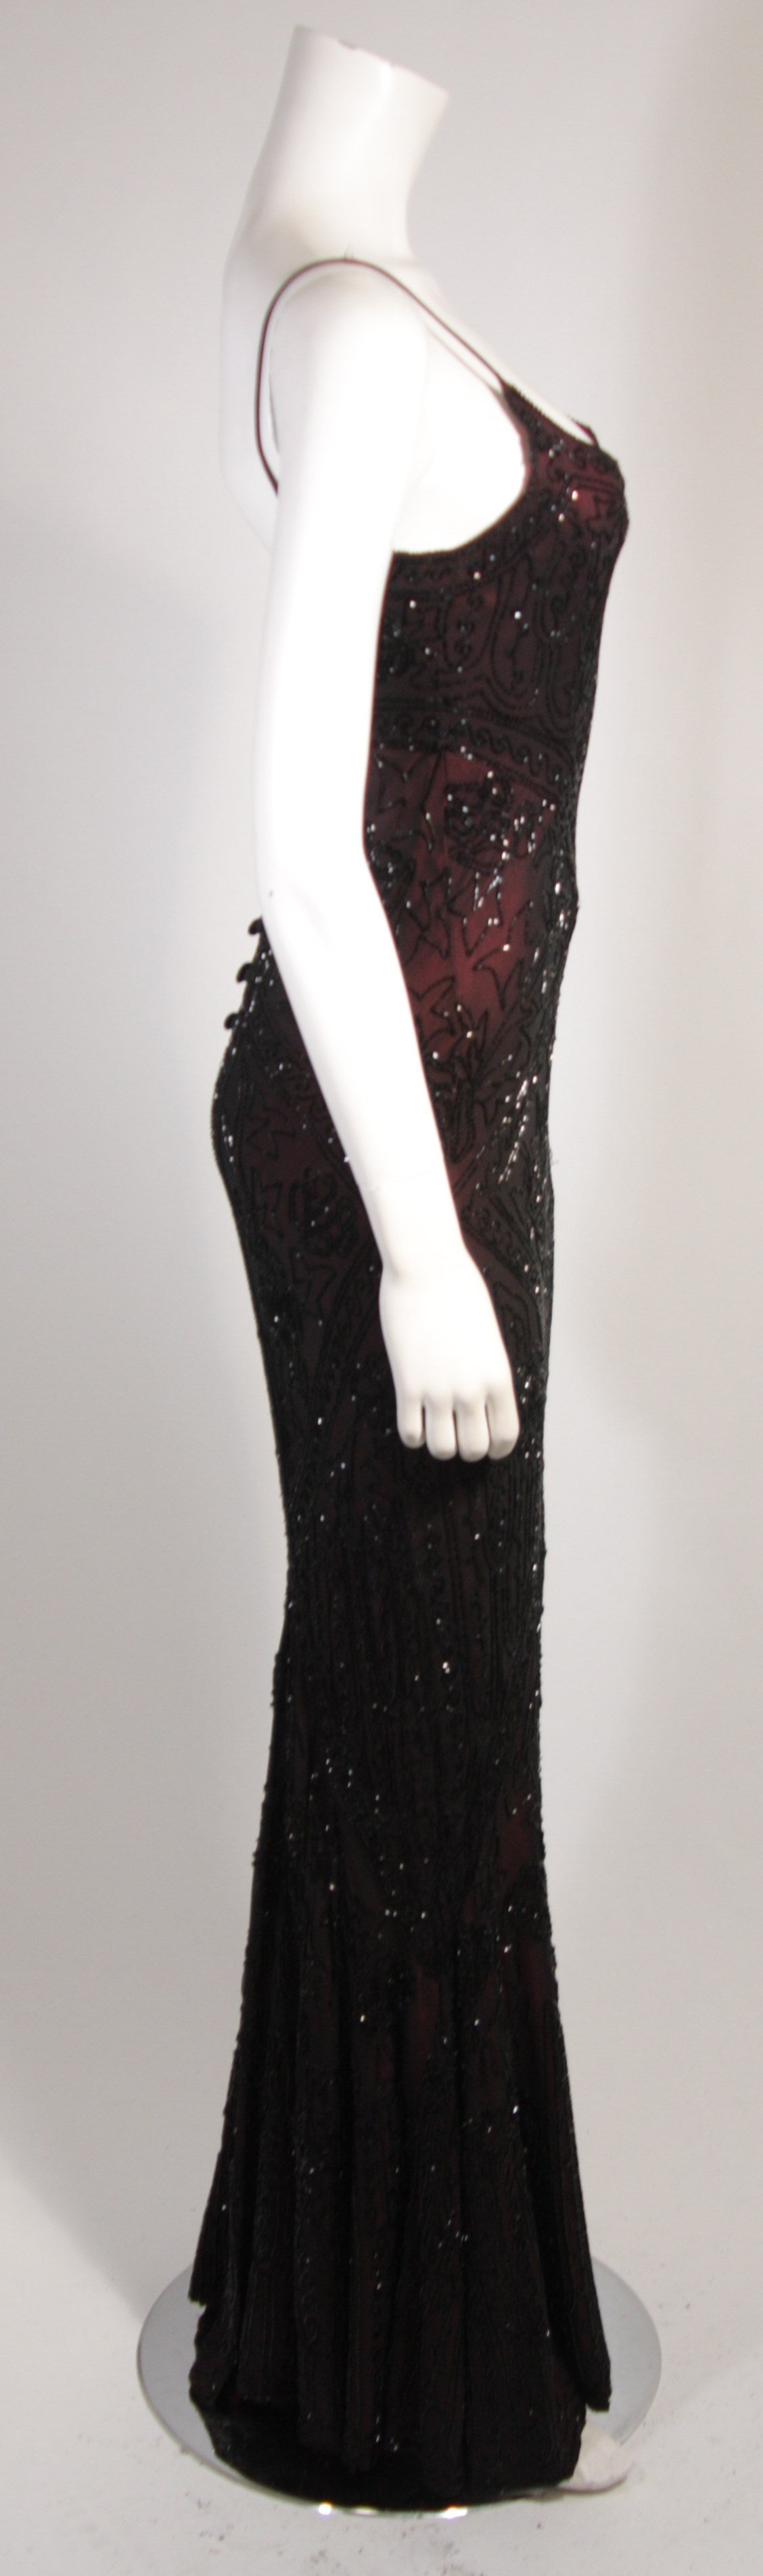 Les Habitudes Deco Inspired Burgundy Beaded Gown Size M 1